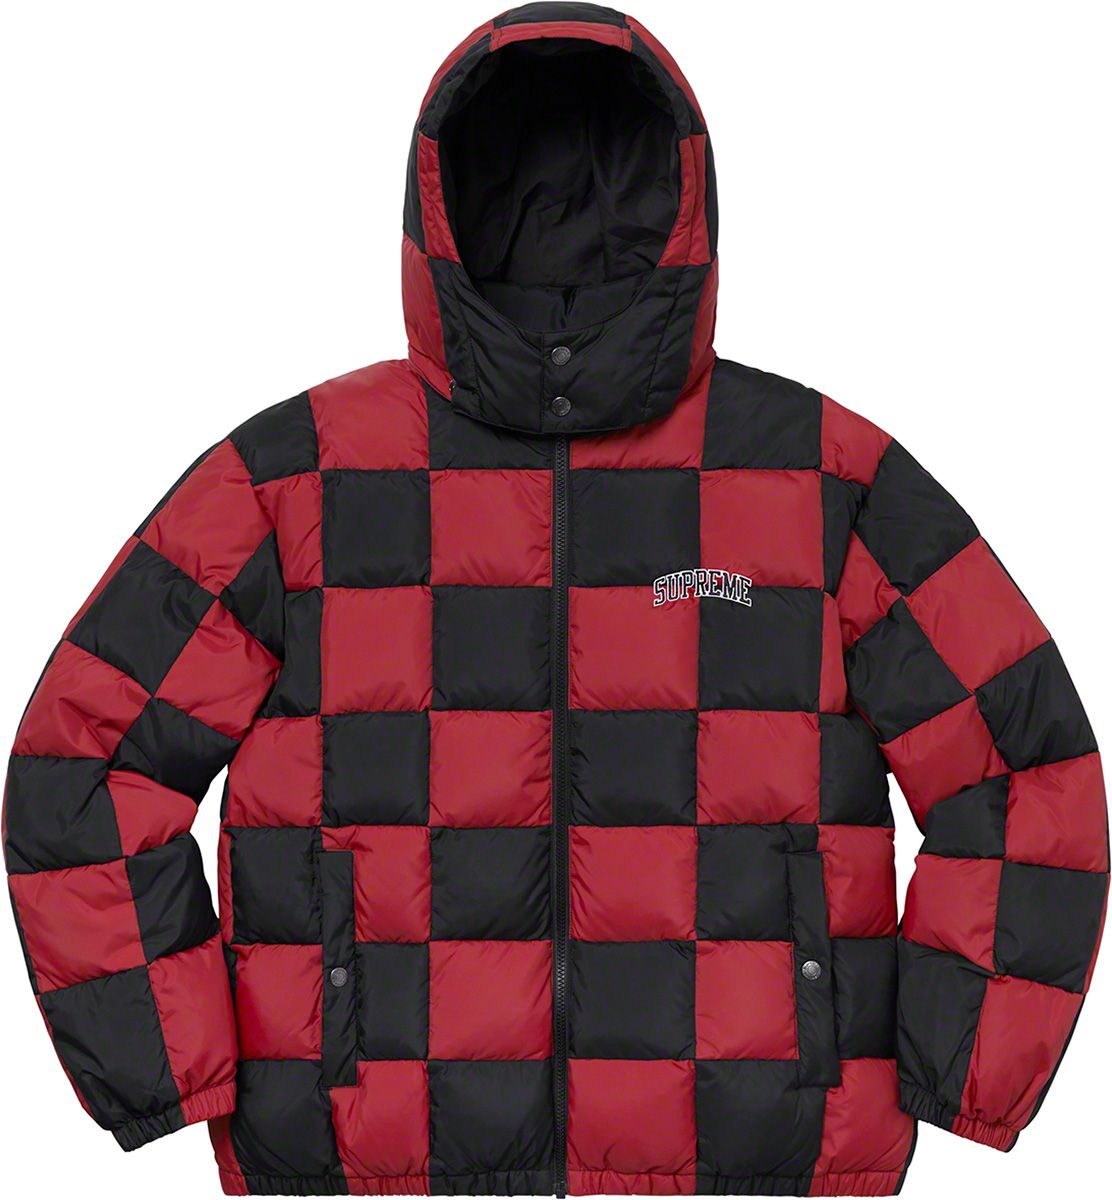 Checkerboard Puffy Jacket - Fall/Winter 2019 Preview – Supreme